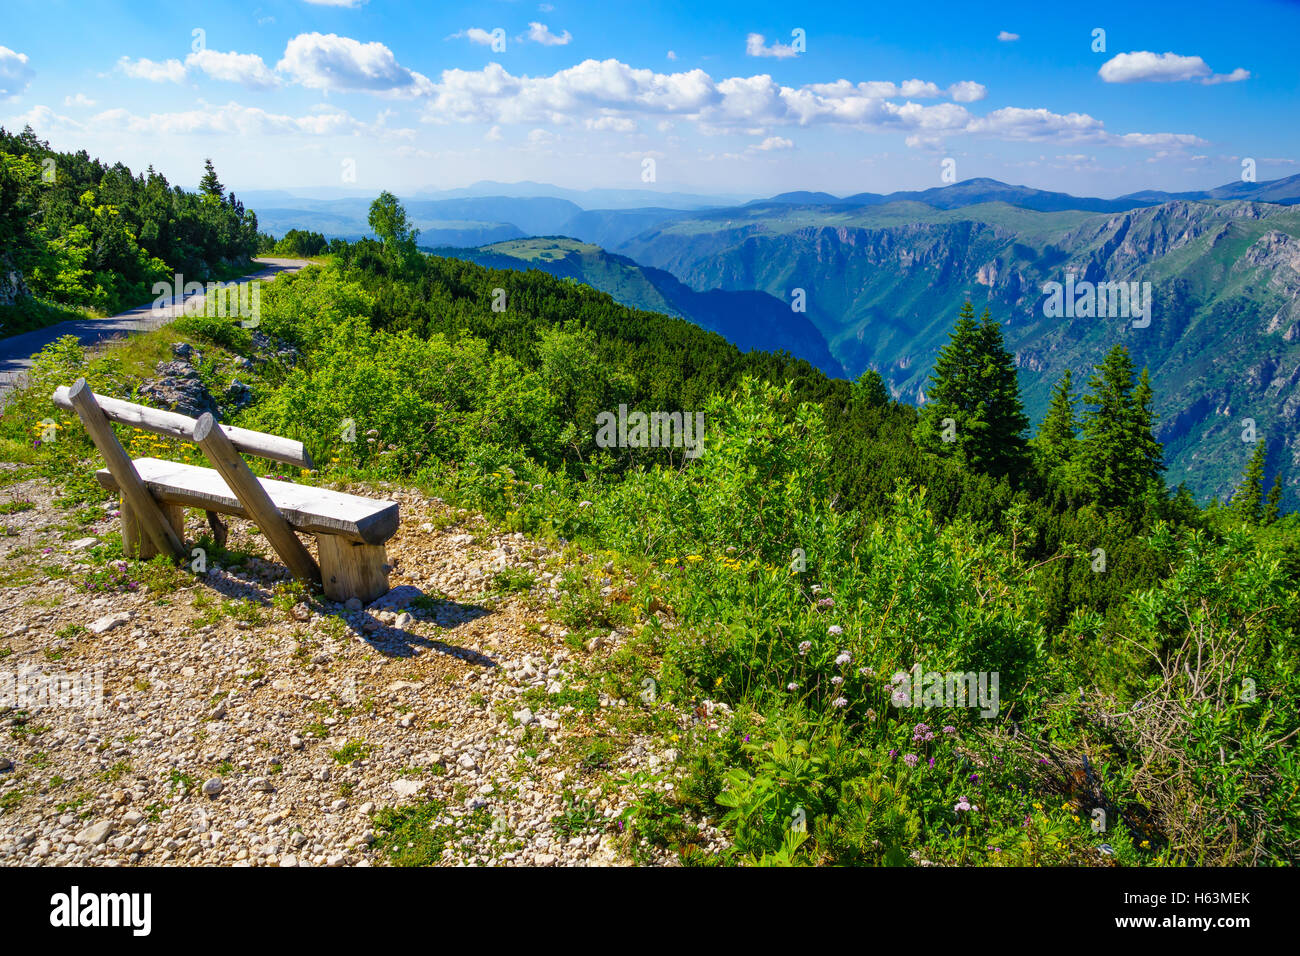 Landscape view and the Tara River Canyon, in Durmitor National Park, Northern Montenegro Stock Photo